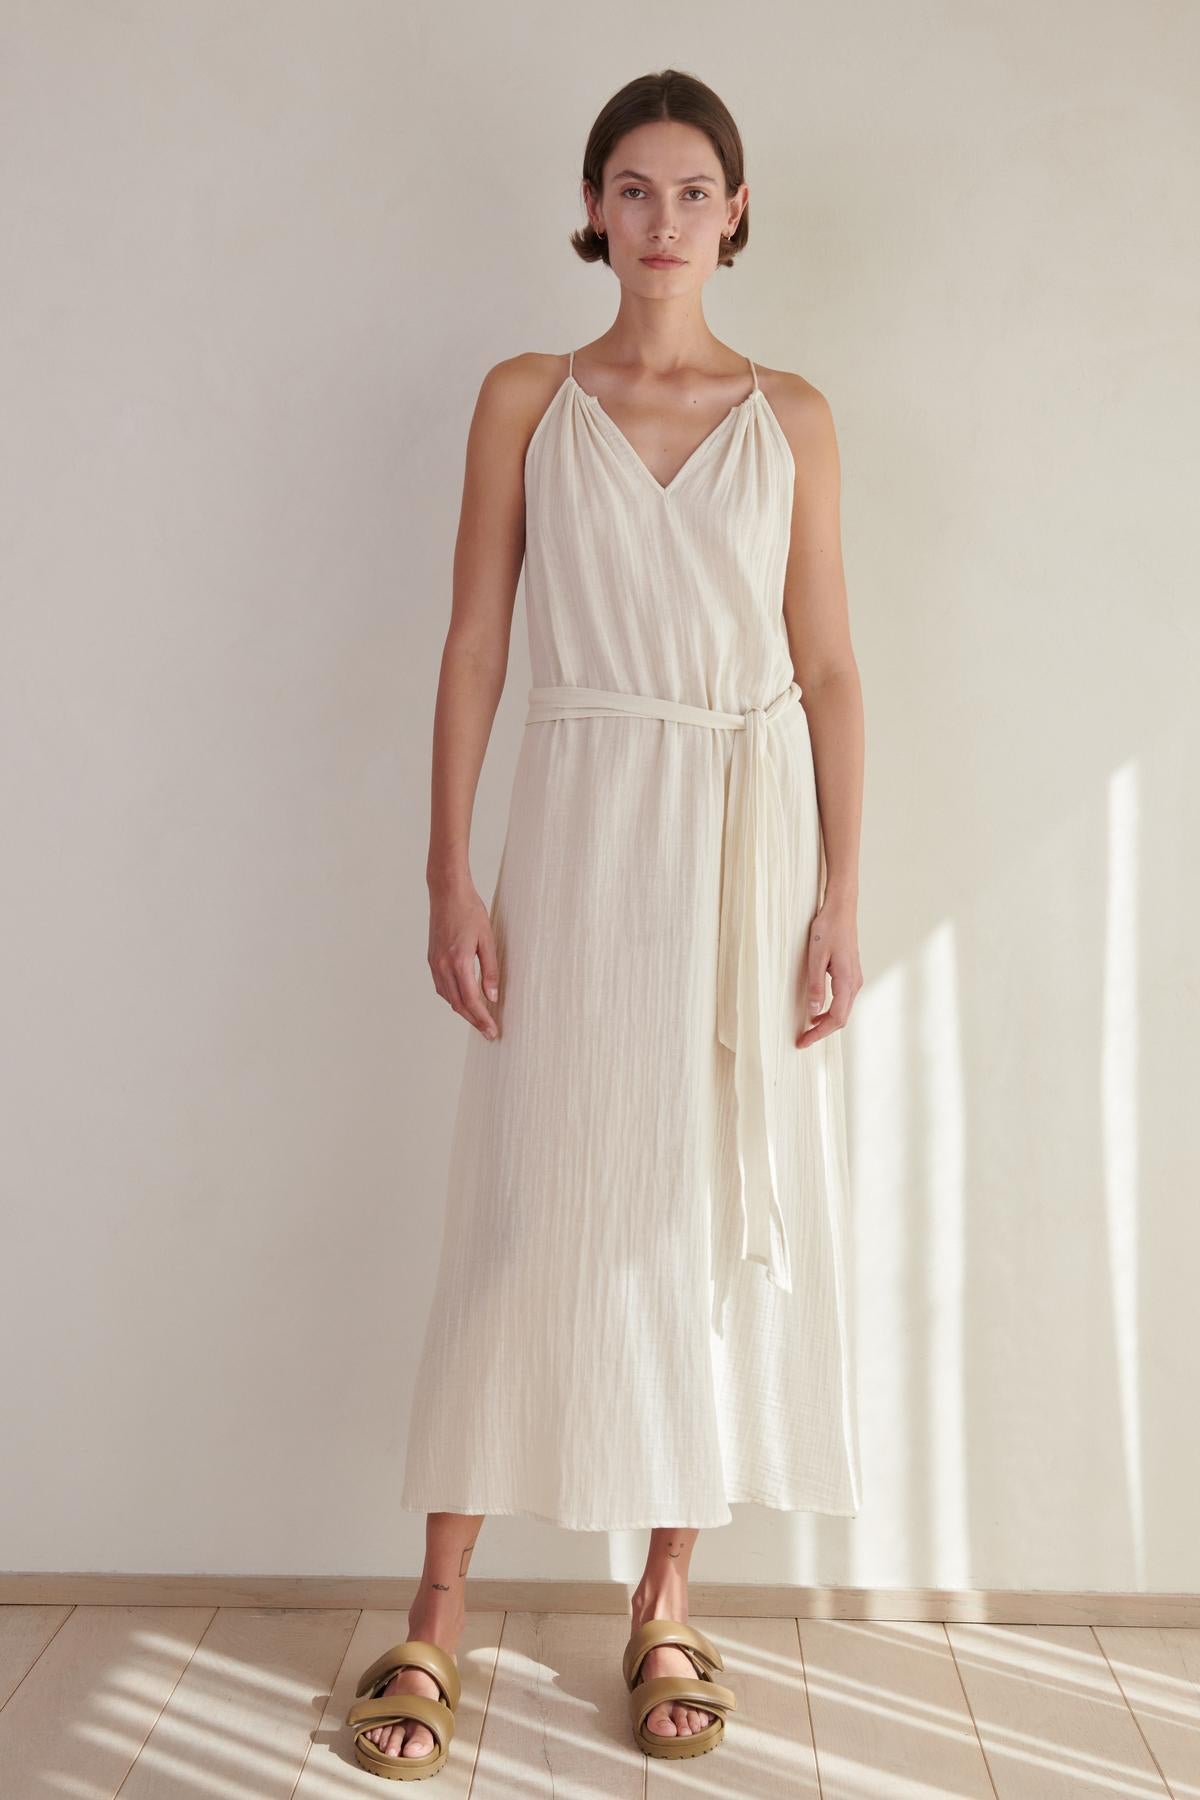 A woman in a white sleeveless CARRILLO DRESS by Velvet by Jenny Graham and gold sandals stands in a sunlit room with a neutral background.-26293219623105